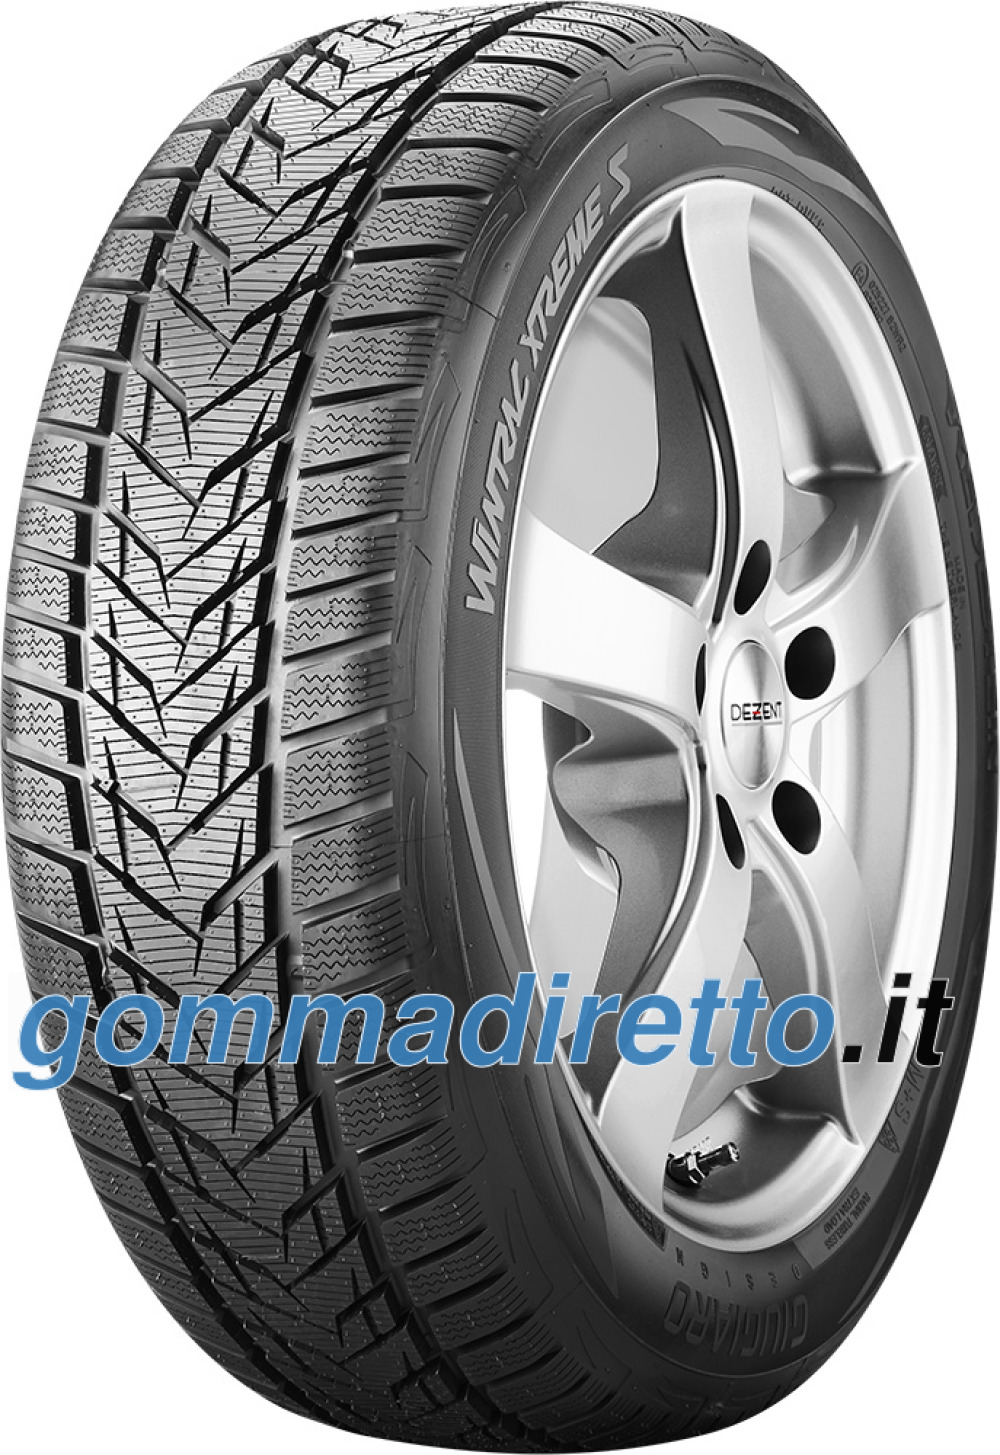 Image of Vredestein Wintrac Xtreme S ( 245/35 R21 96Y XL )